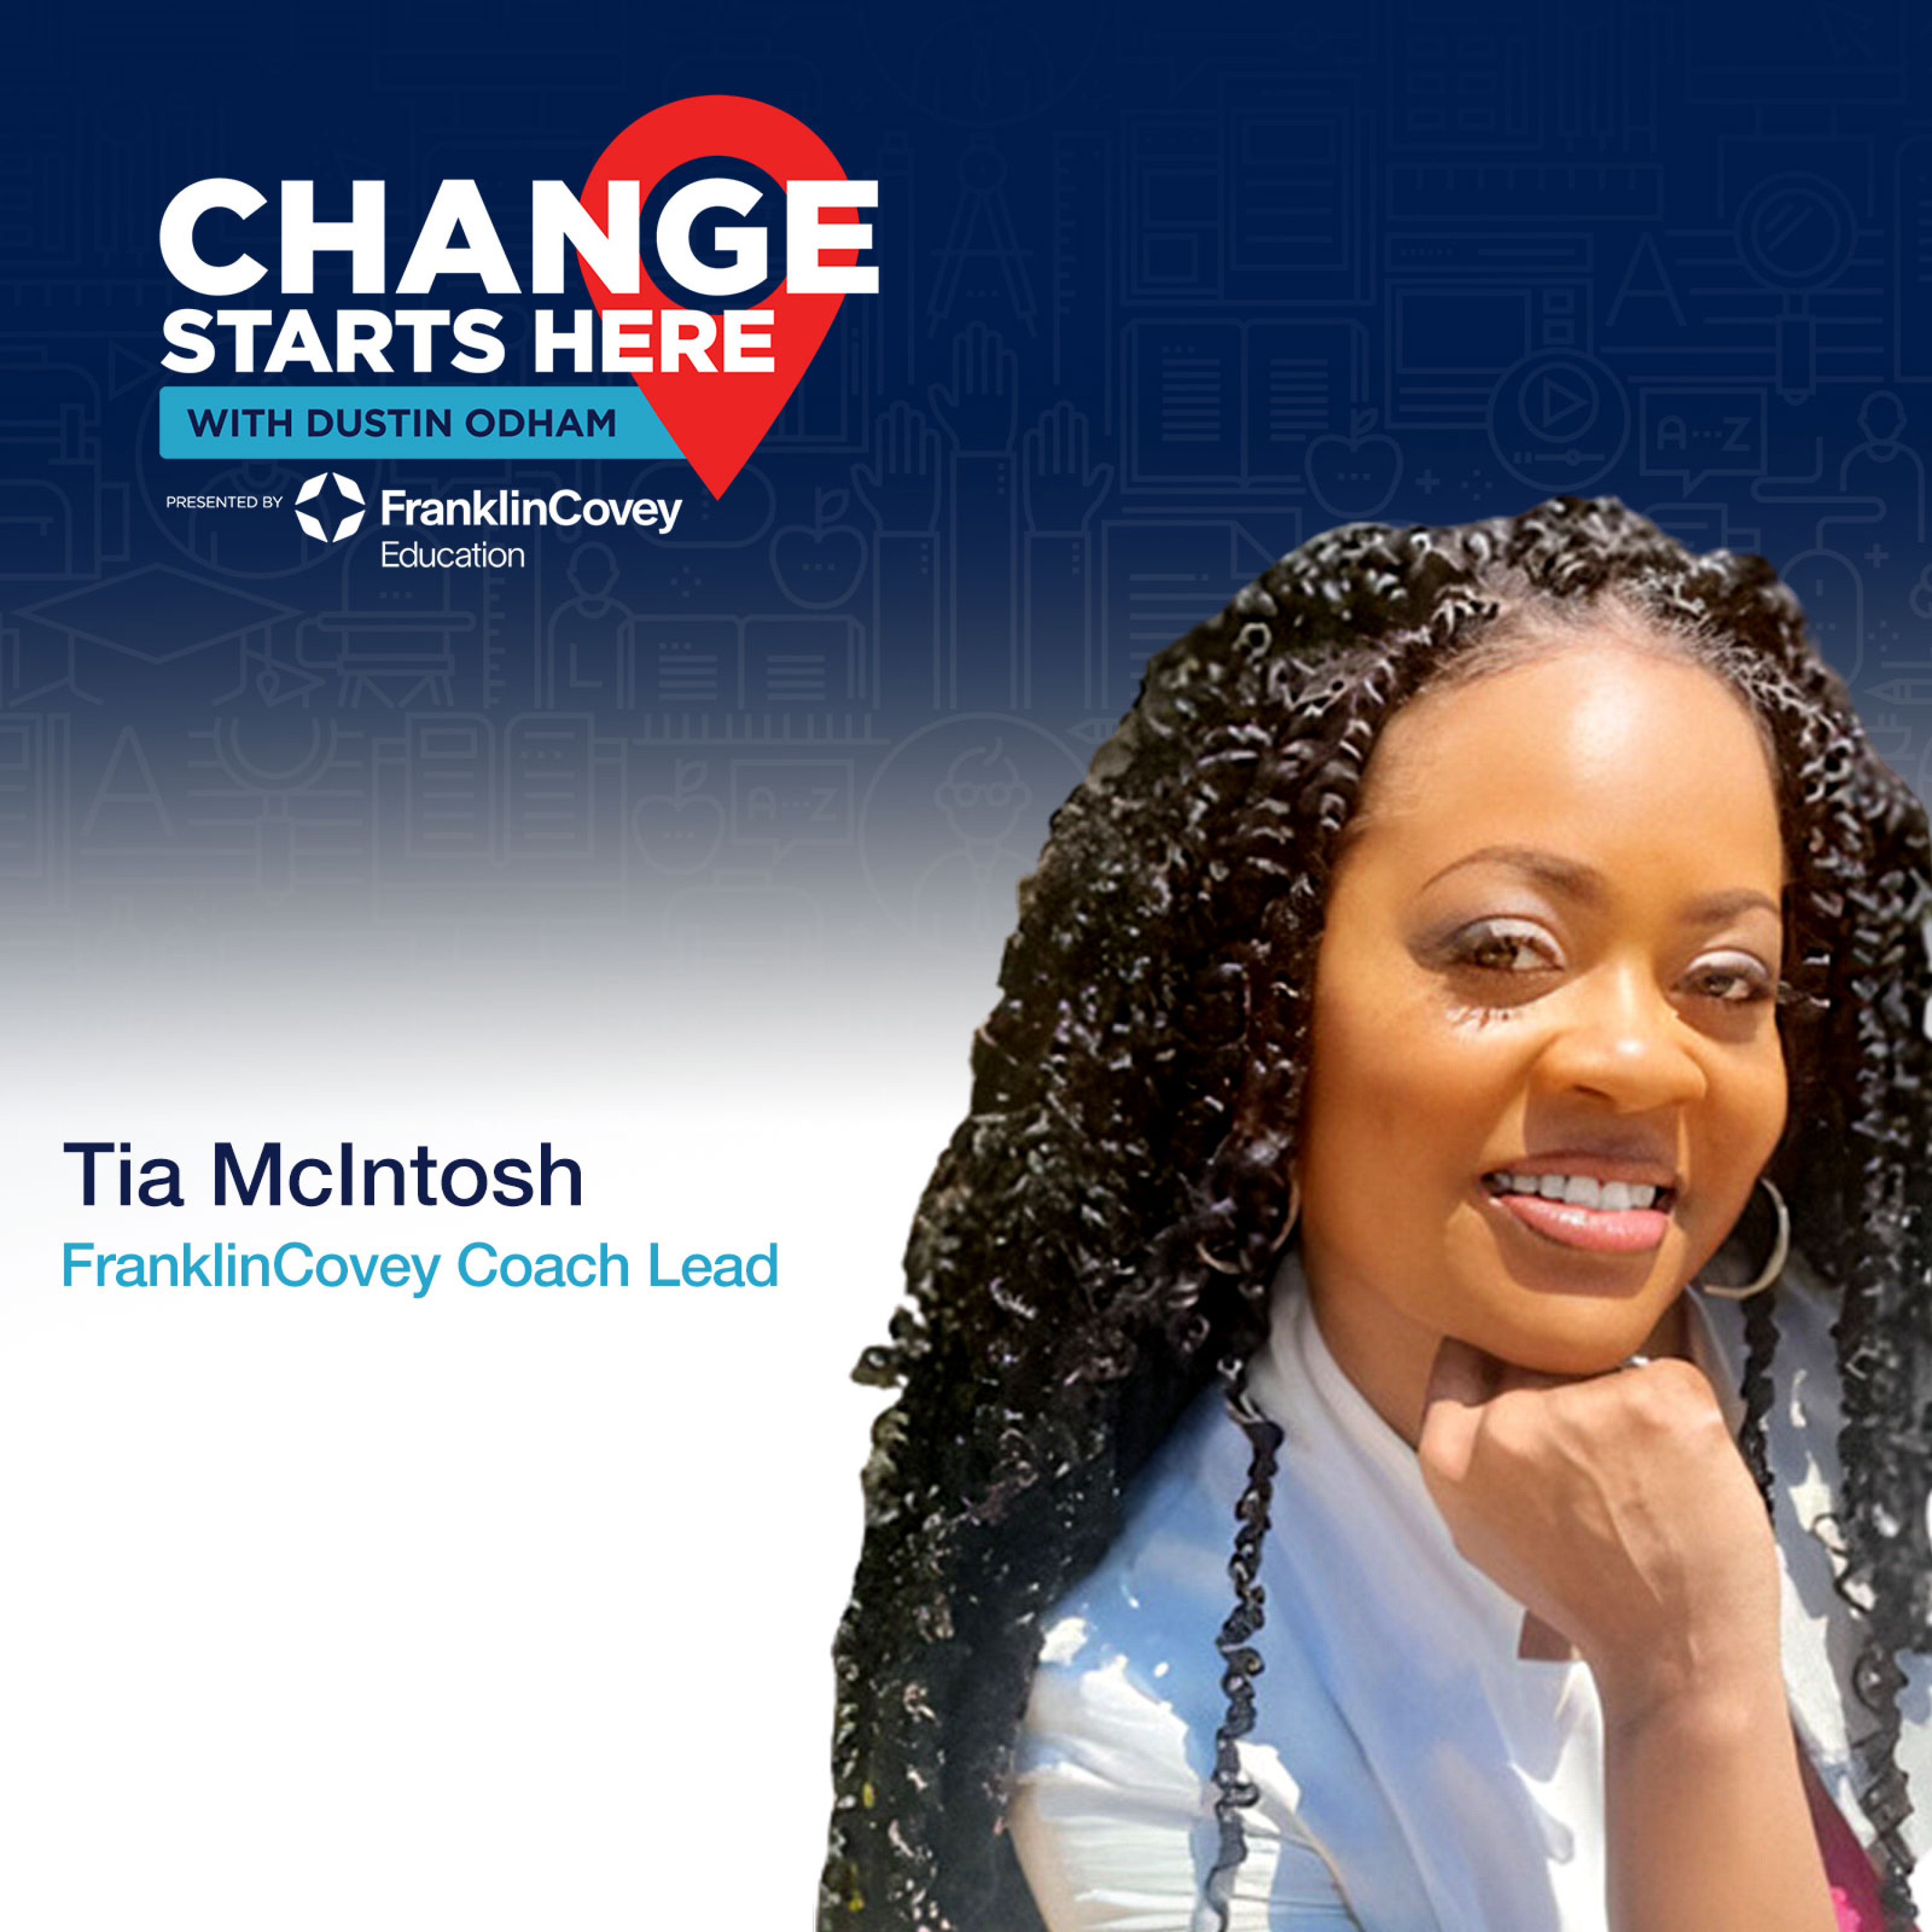 Tia McIntosh, FranklinCovey Coaching Director, On How to Create a Culture of Belonging